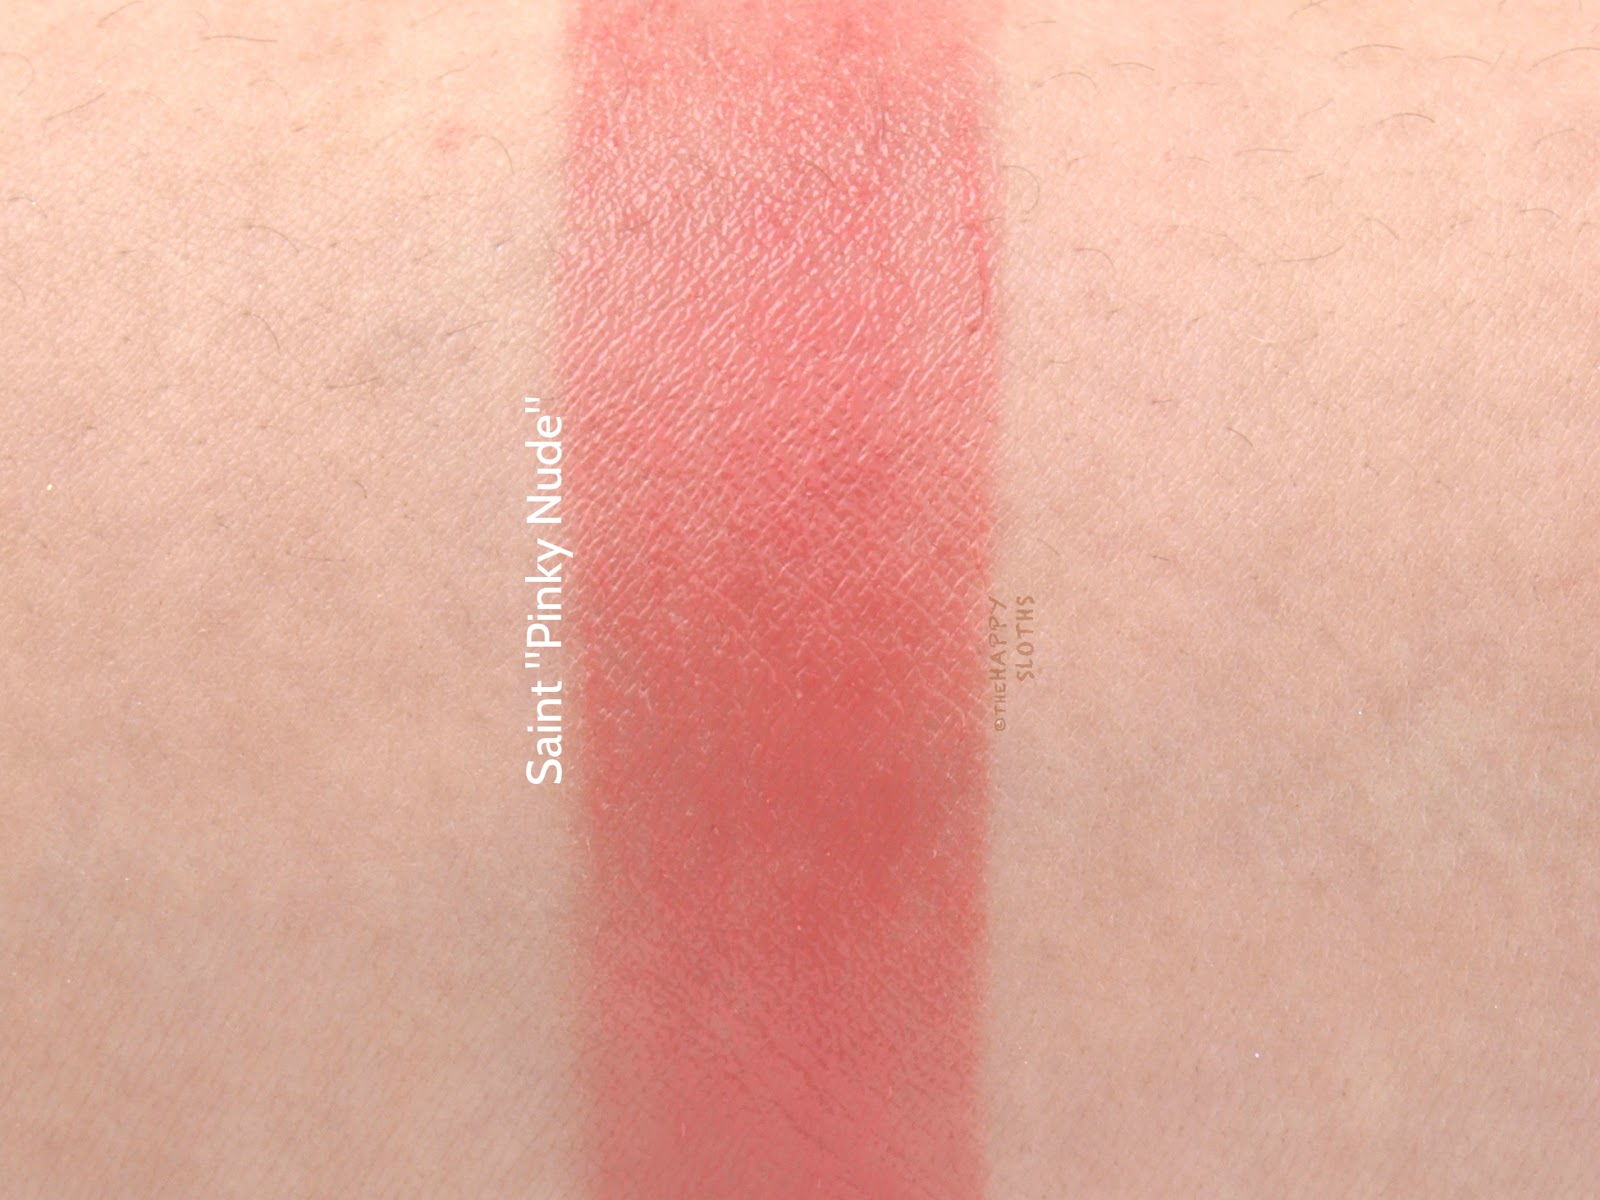 Lipstick Queen Jean Queen Lipstick: Review and Swatches